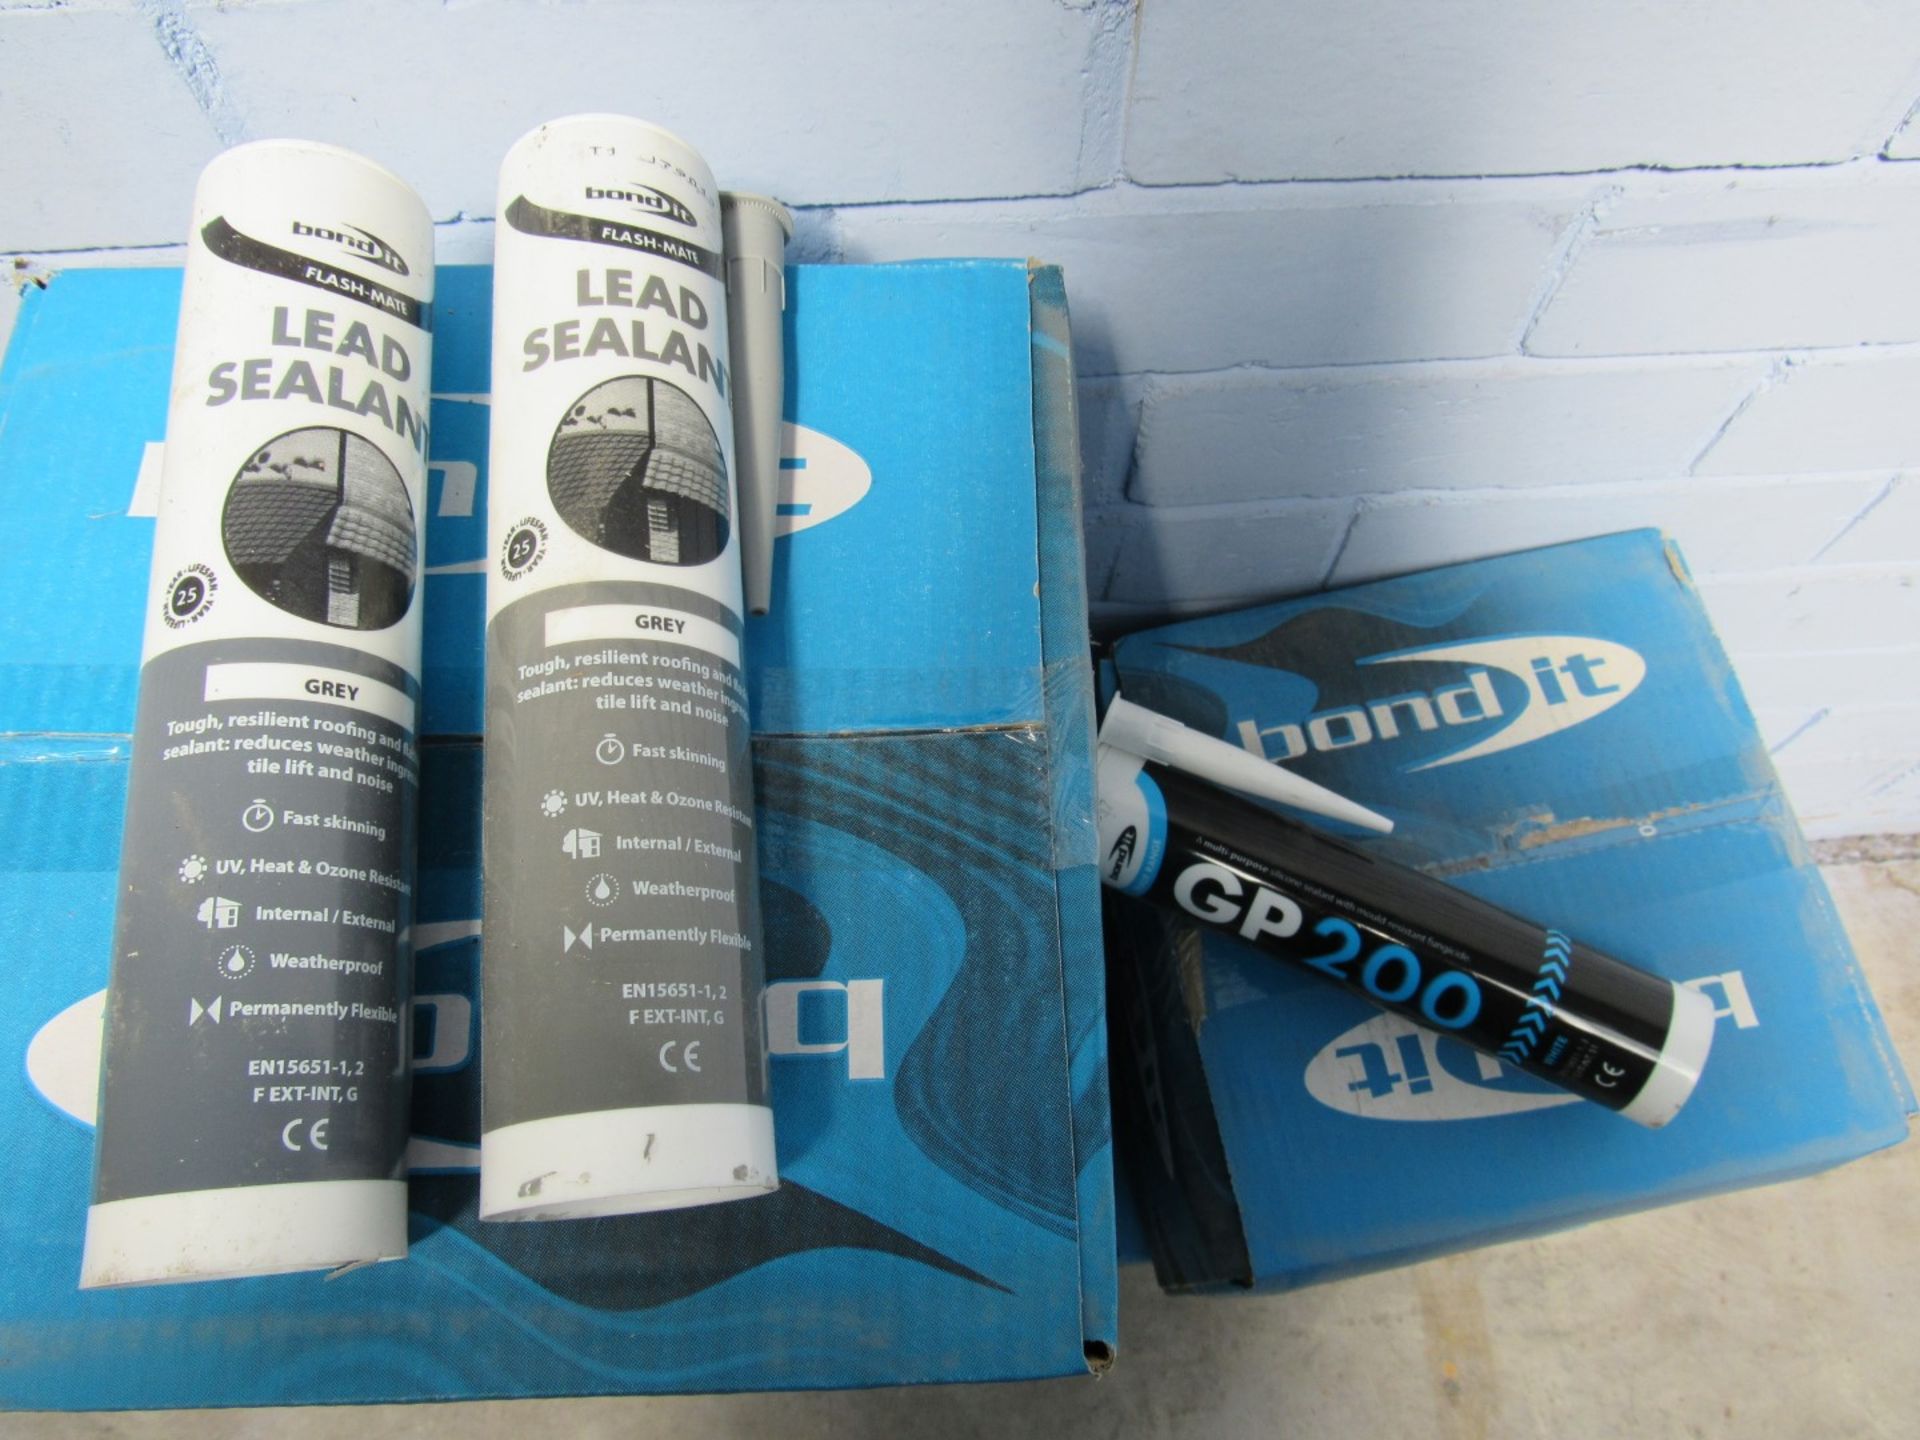 Quantity Bond it lead sealant and white sealant to 5 boxes - Image 2 of 2